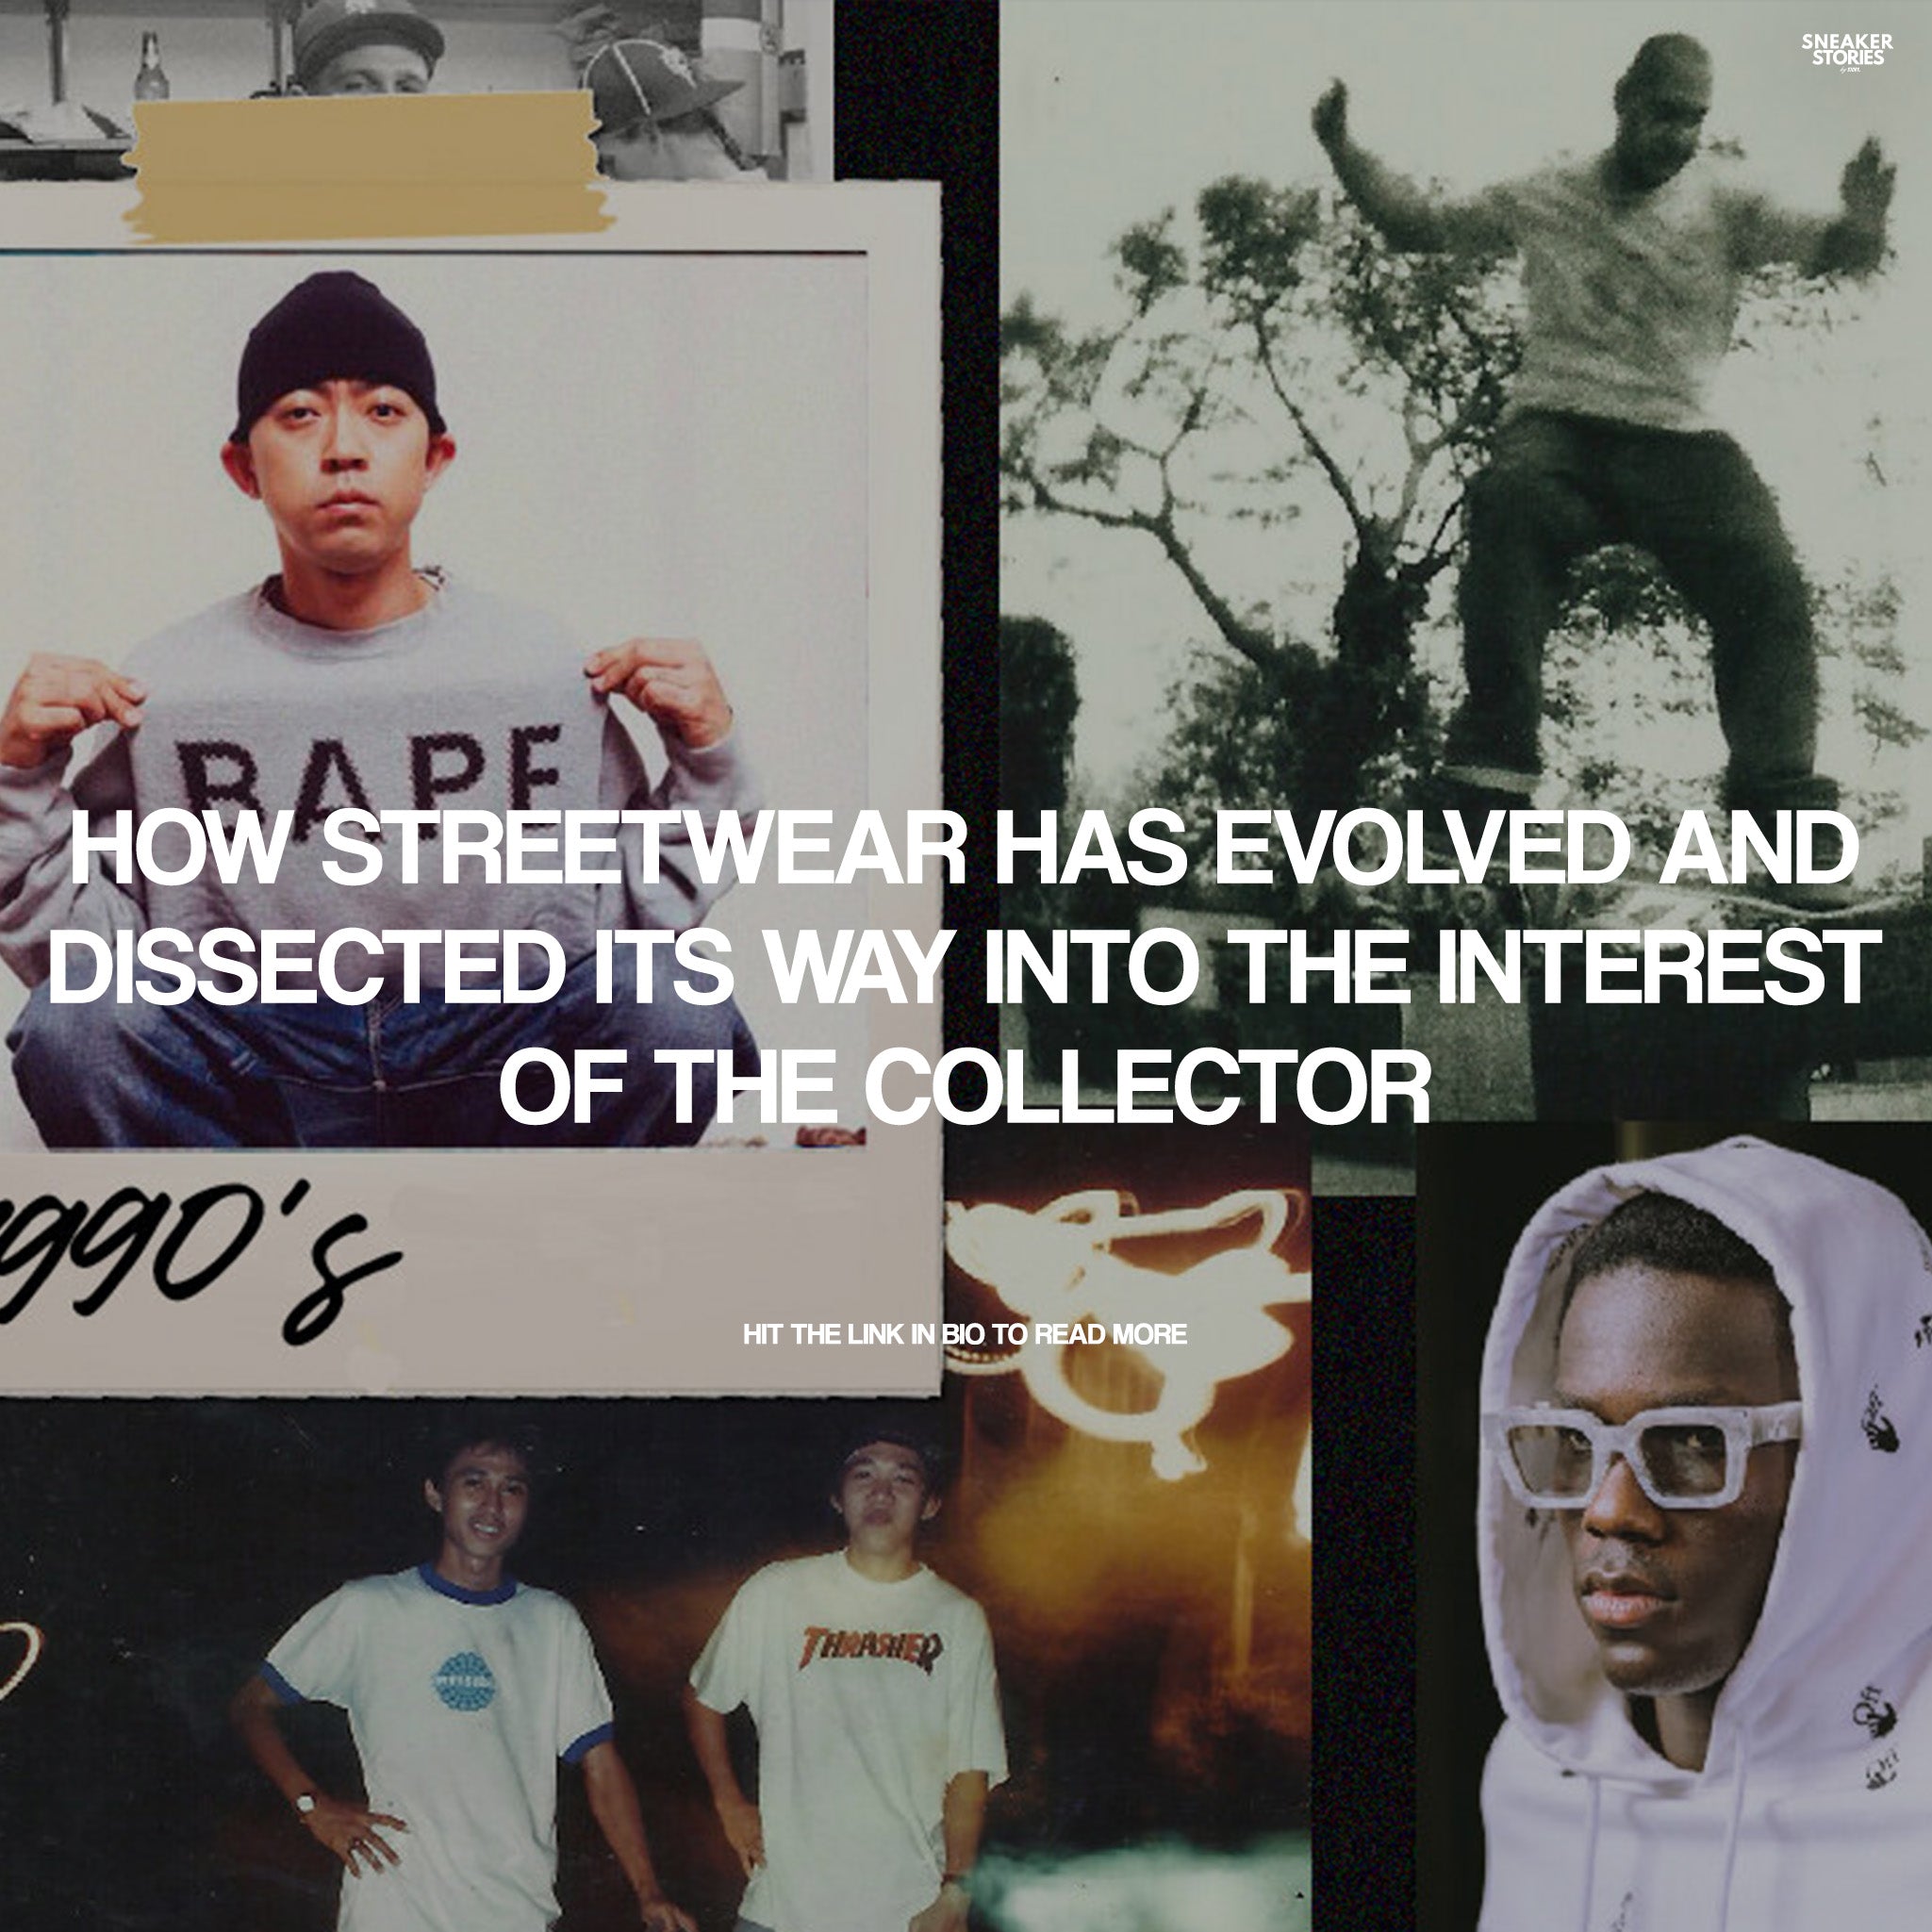 How streetwear has evolved and dissected its way into the interest of the collector